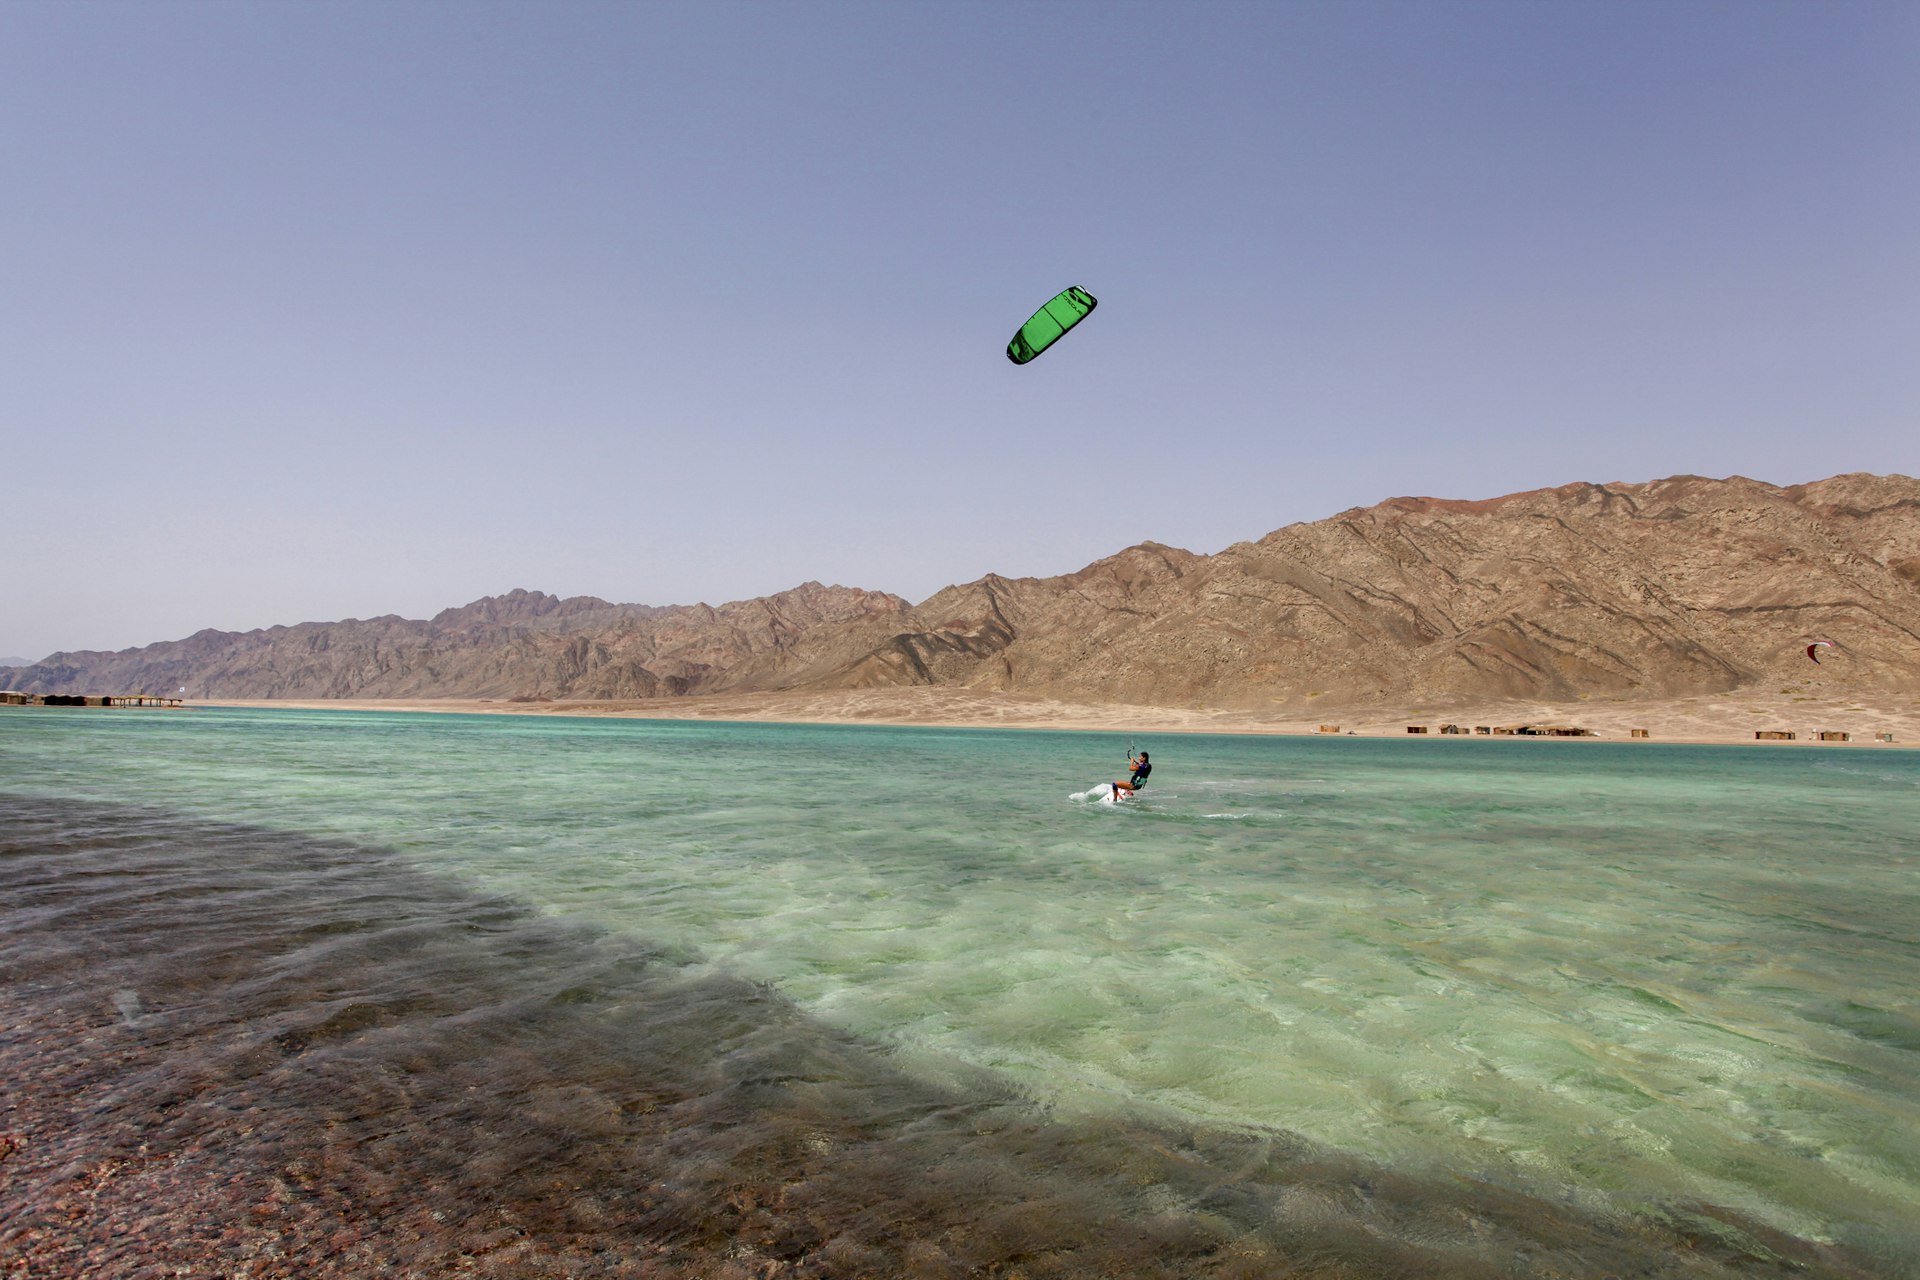 A solo kite-surfer on a turquoise lagoon surrounded by sand-colored hills